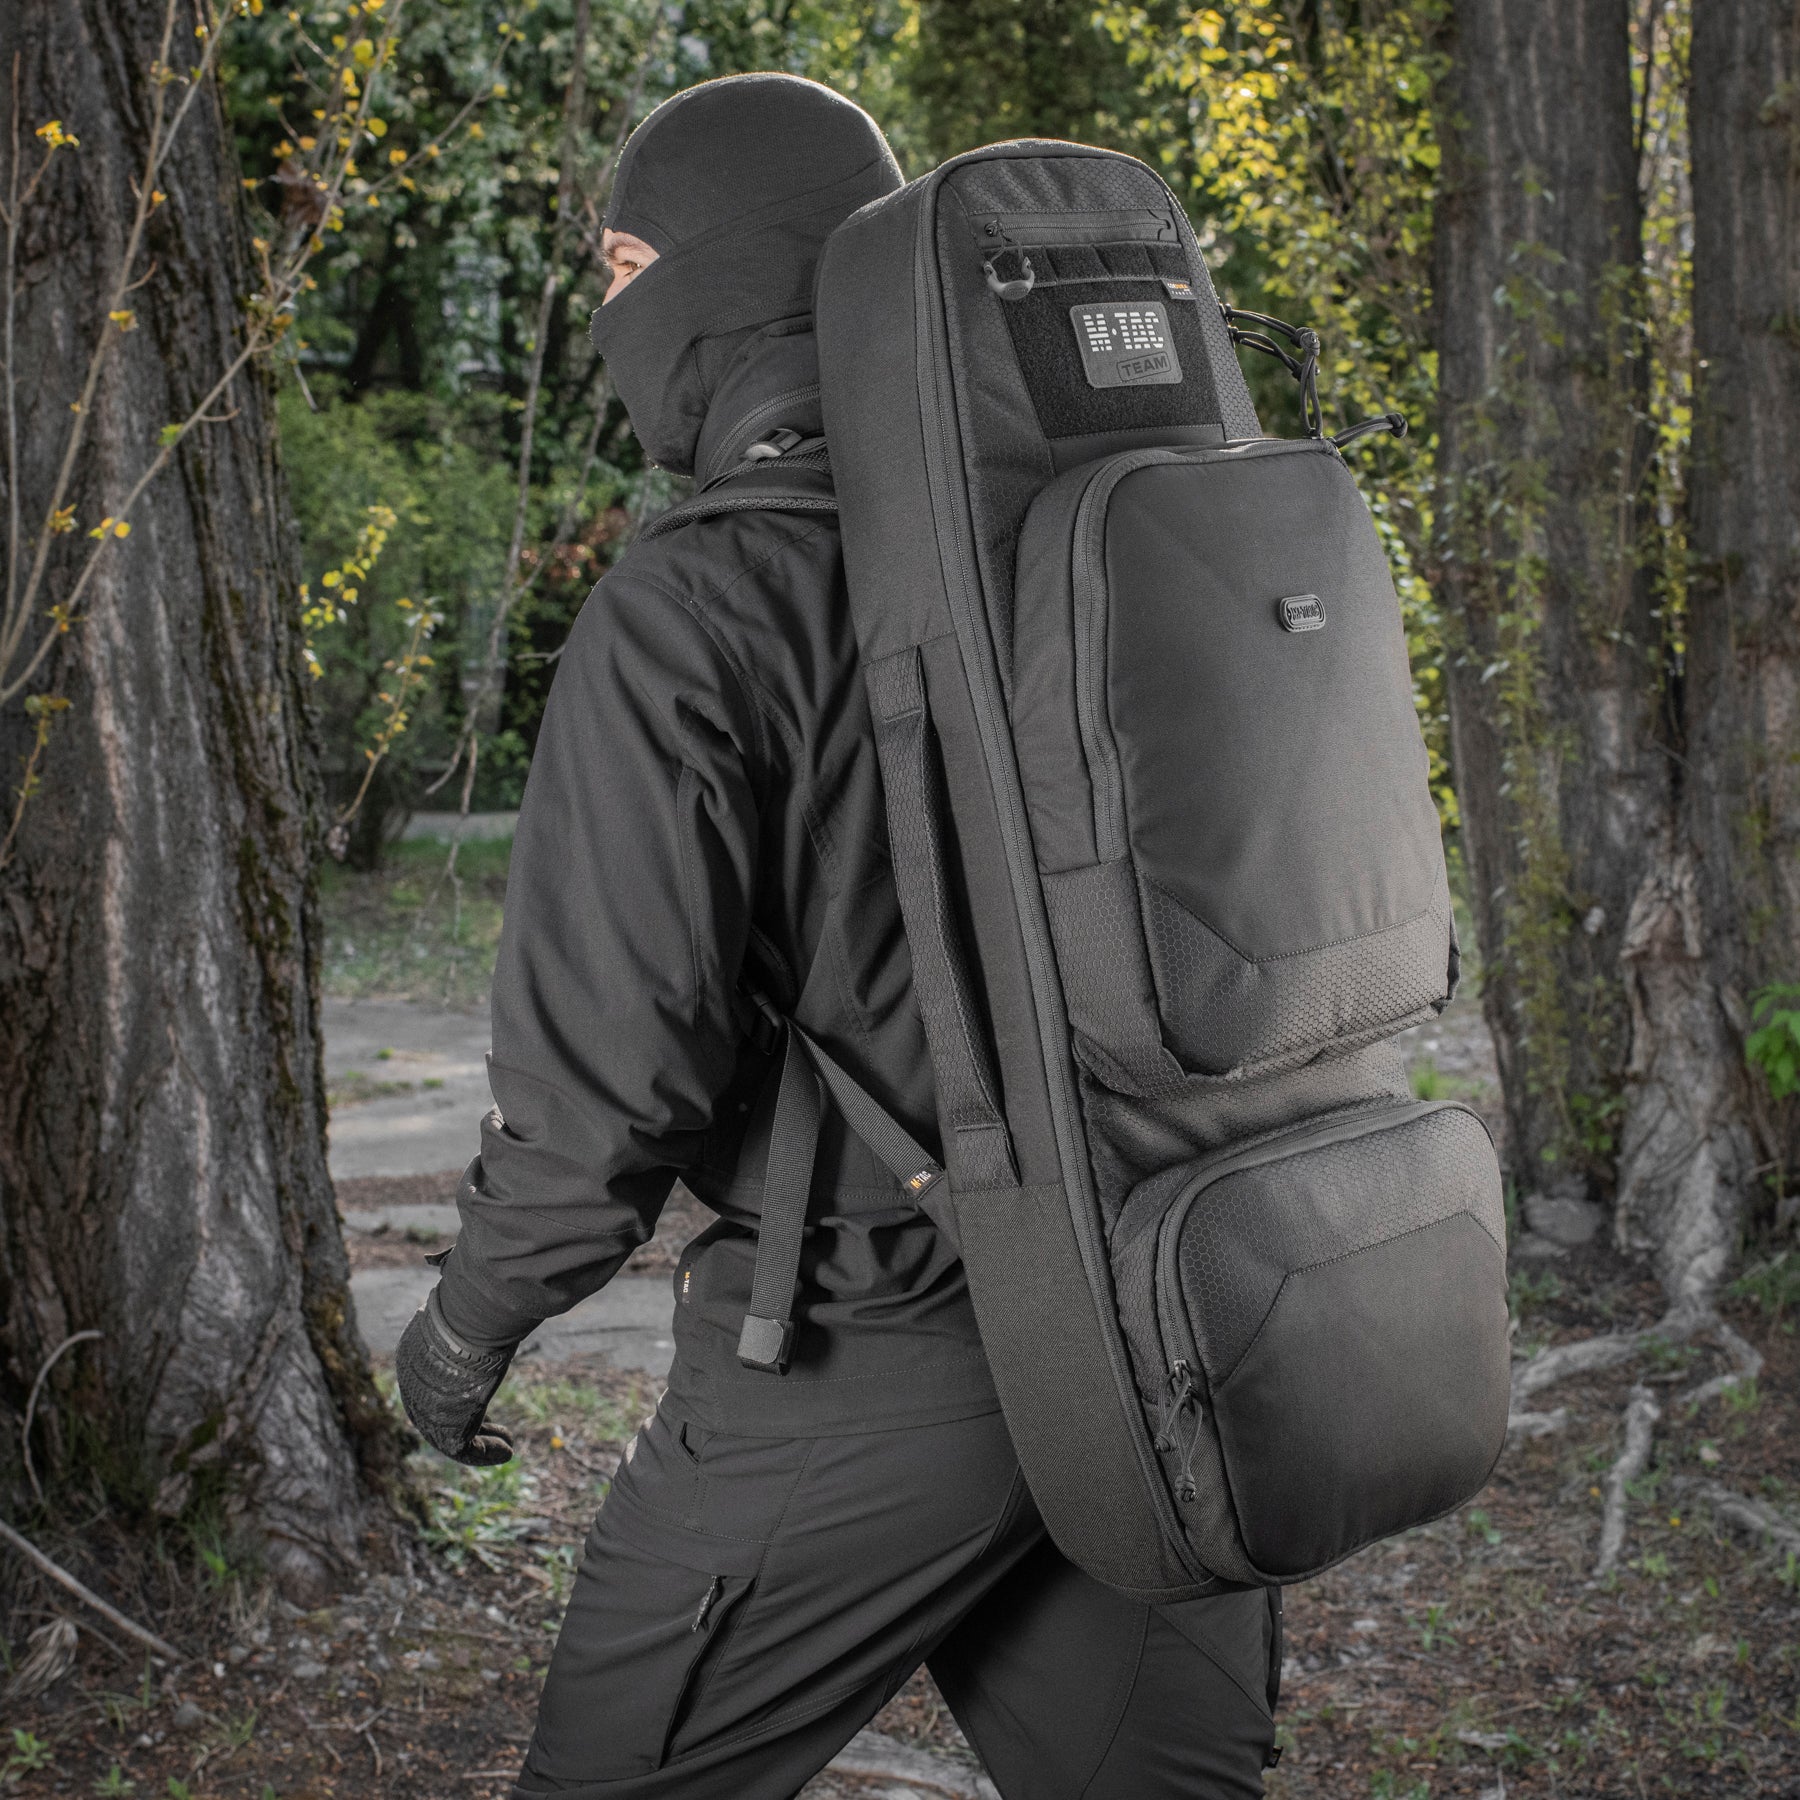 TacStore Tactical & Outdoors M-Tac Backpack Large Elite Hex